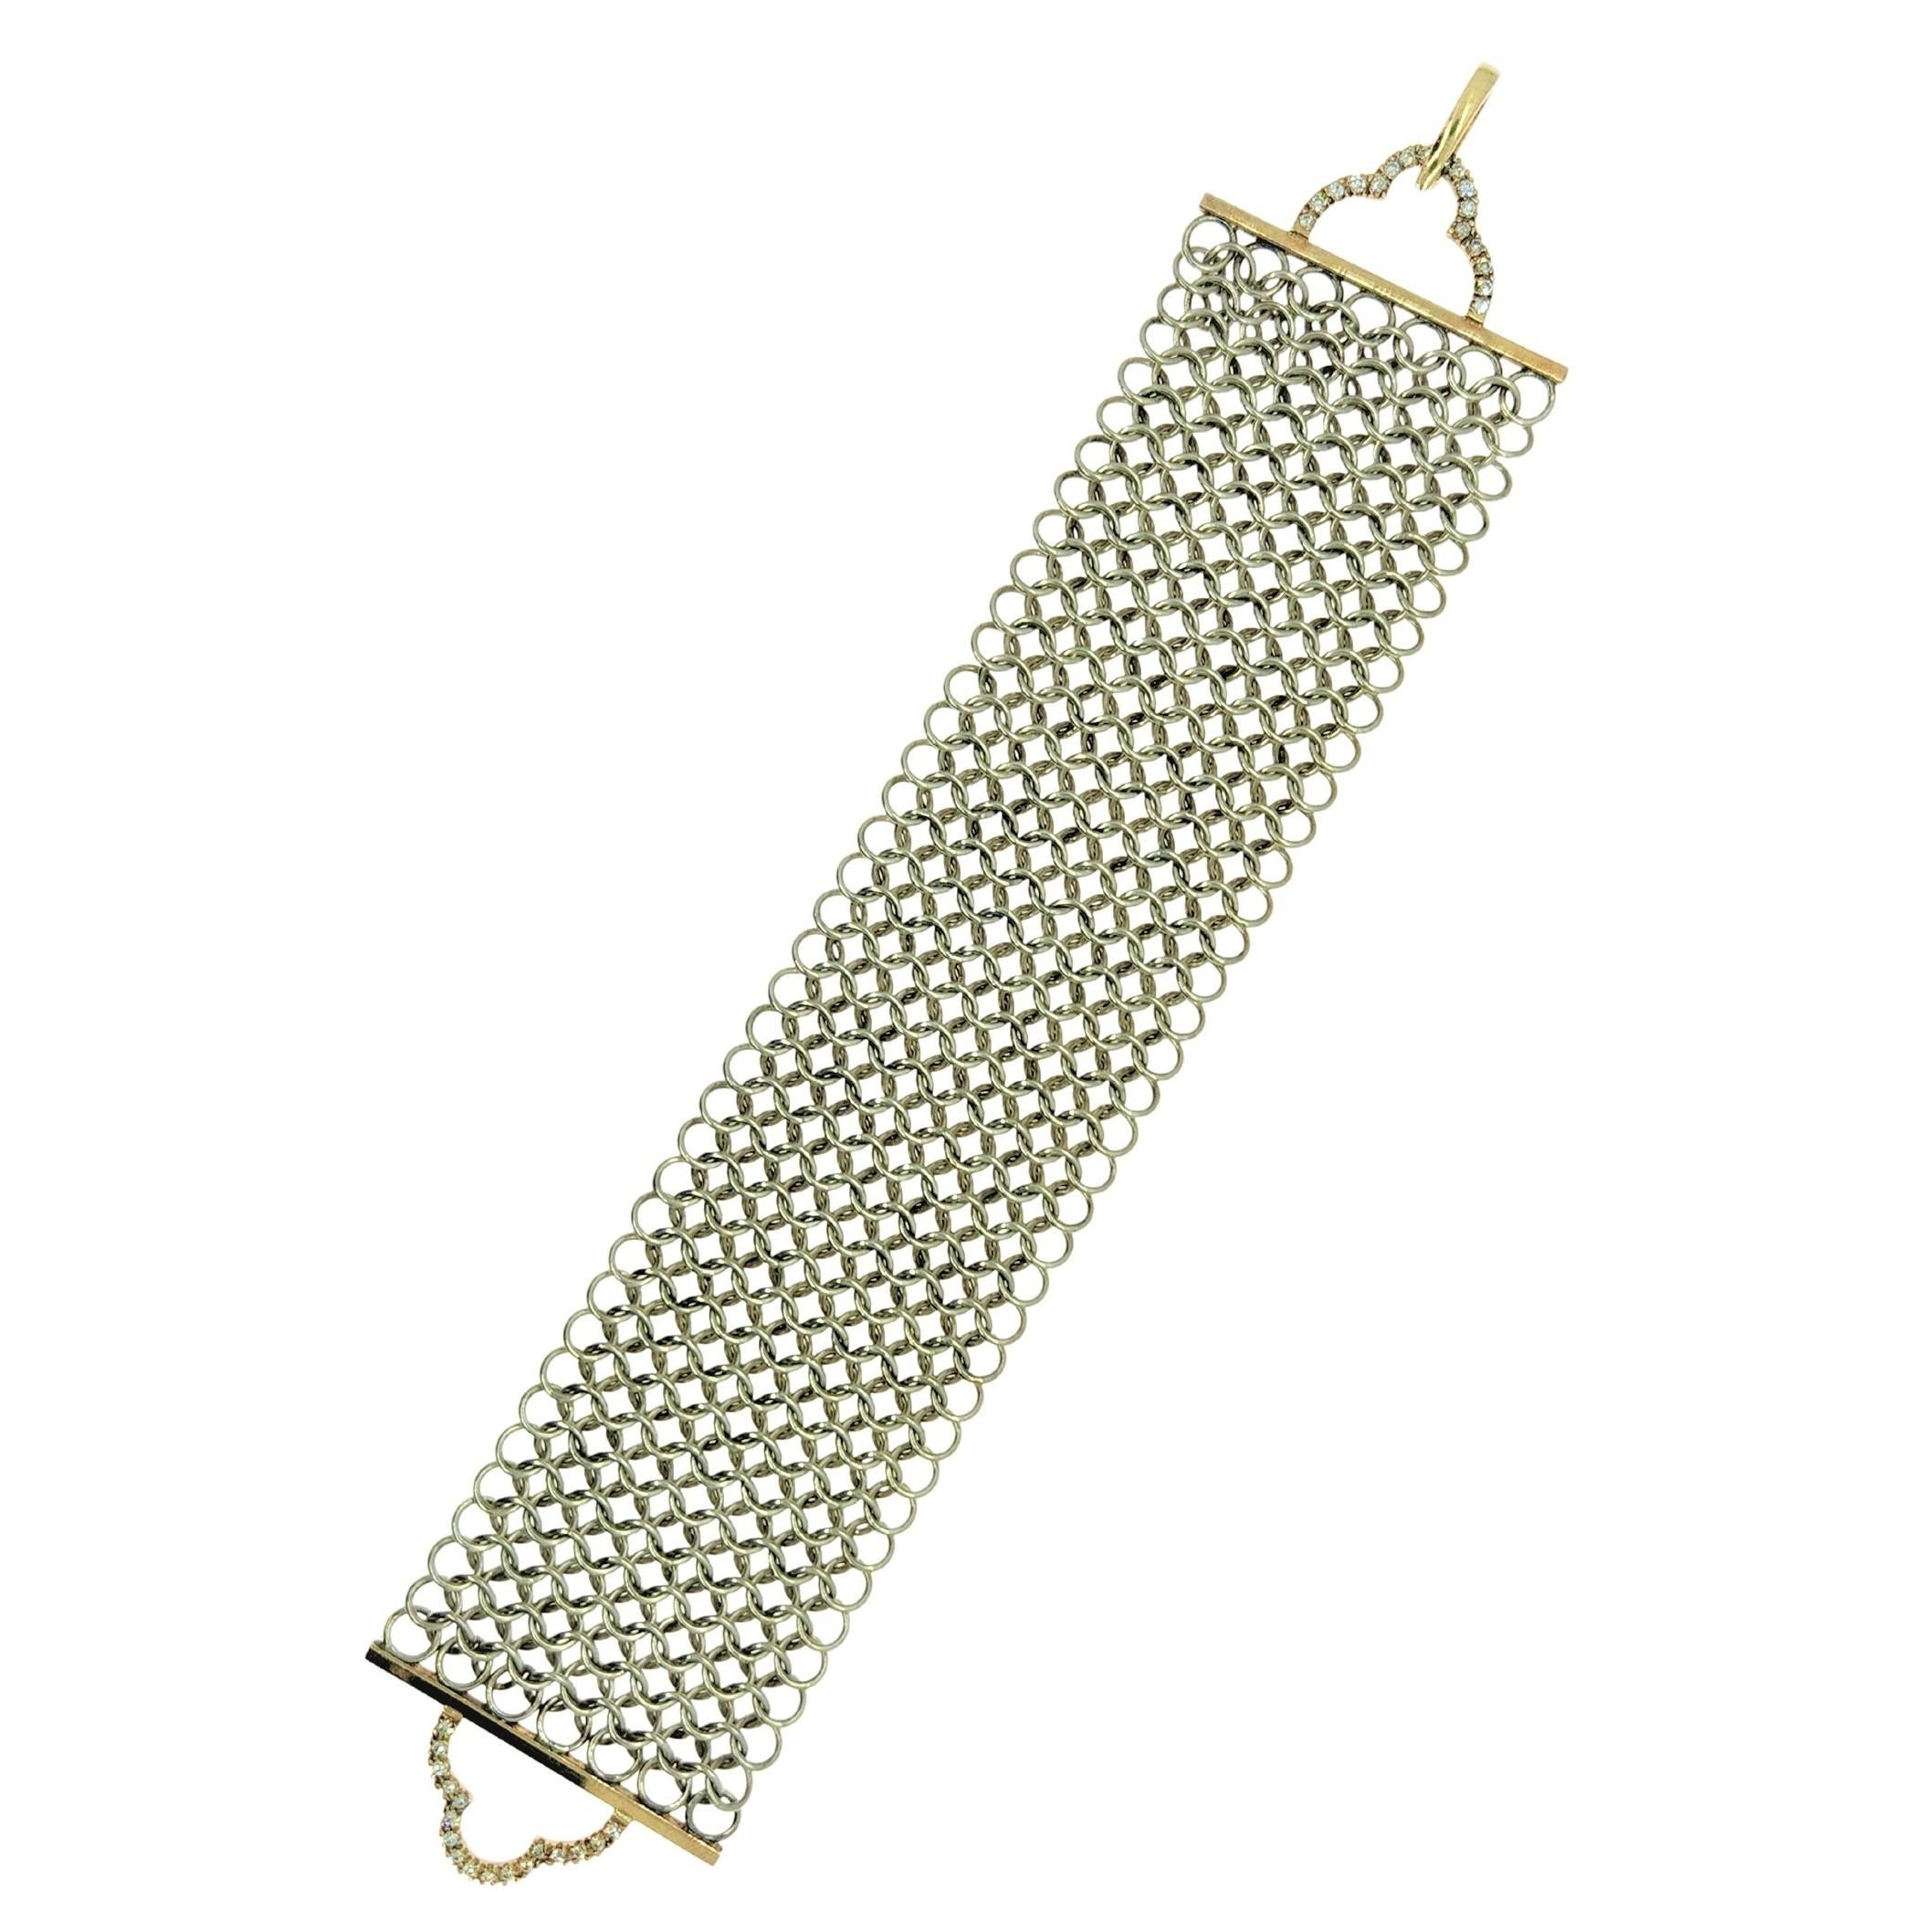 A unique bracelet design for women to feel powerful. The Deco Power Bracelet is a wide style that is flexible and drapes the wrist. The weight is evenly distributed and feels cozy as it moves with arm and wrist movement. 
The silver chainmail is